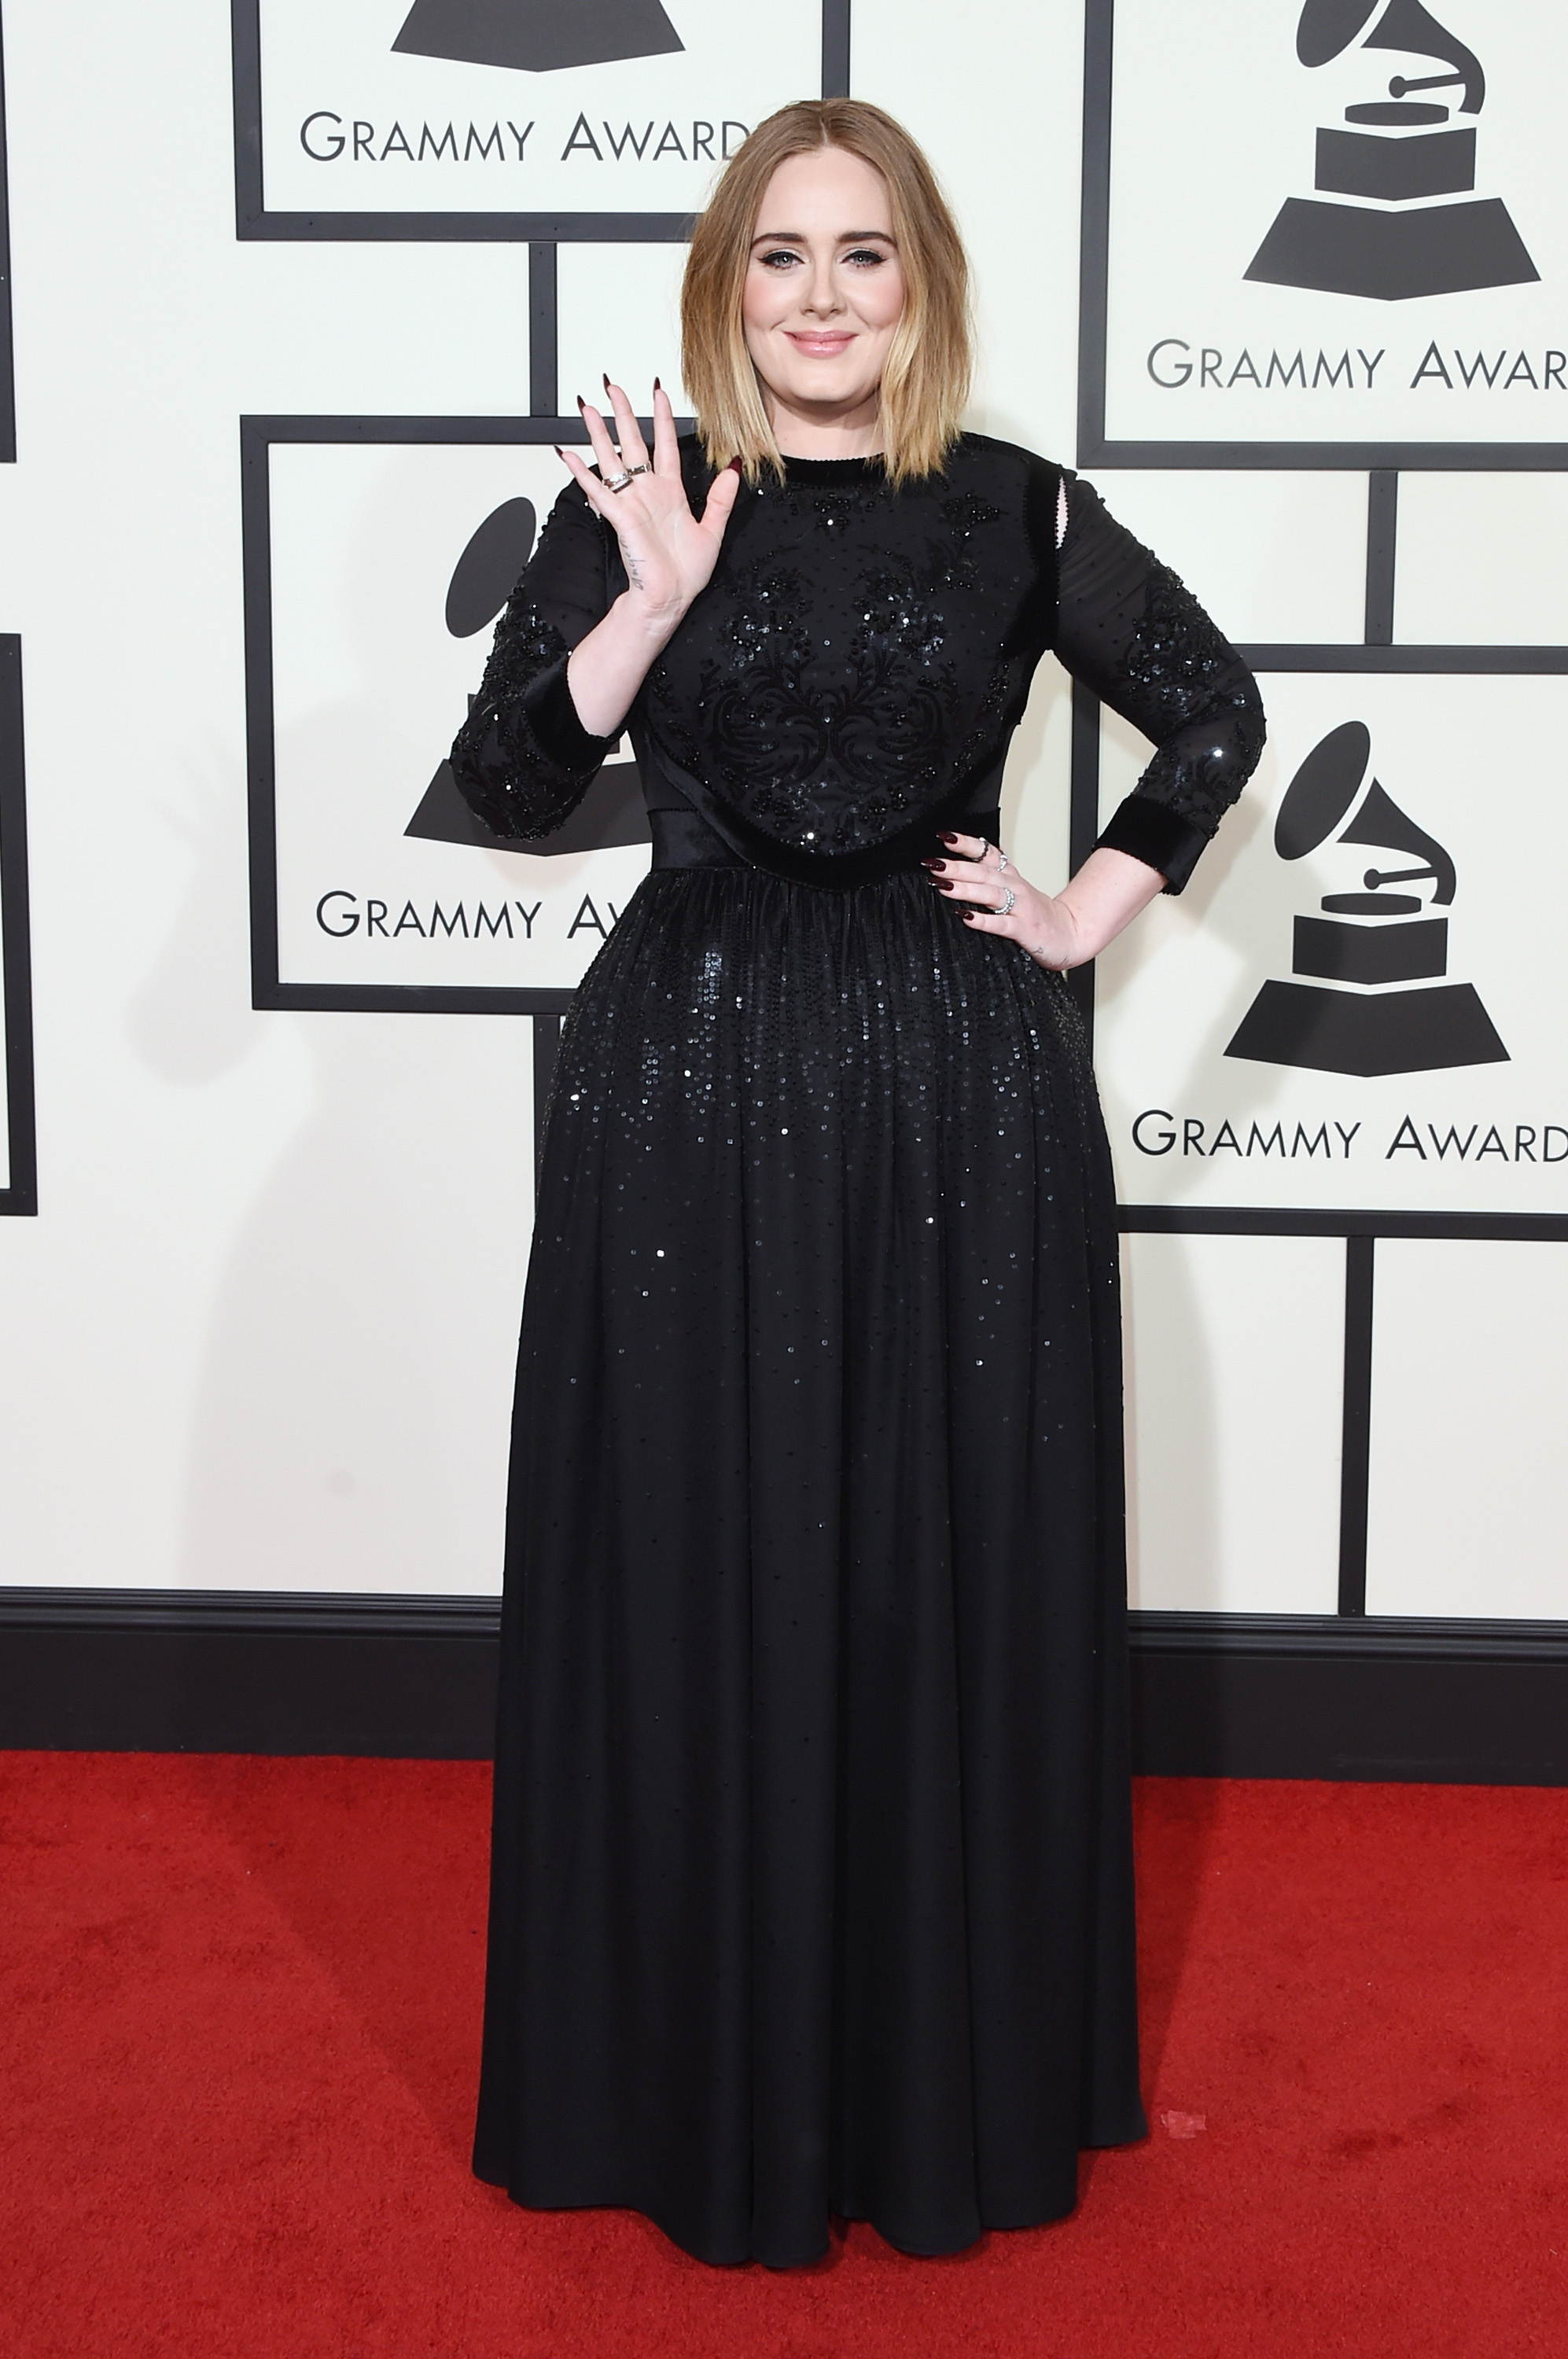 Adele attends the 58th GRAMMY Awards at Staples Center on Feb. 15, 2016 in Los Angeles.